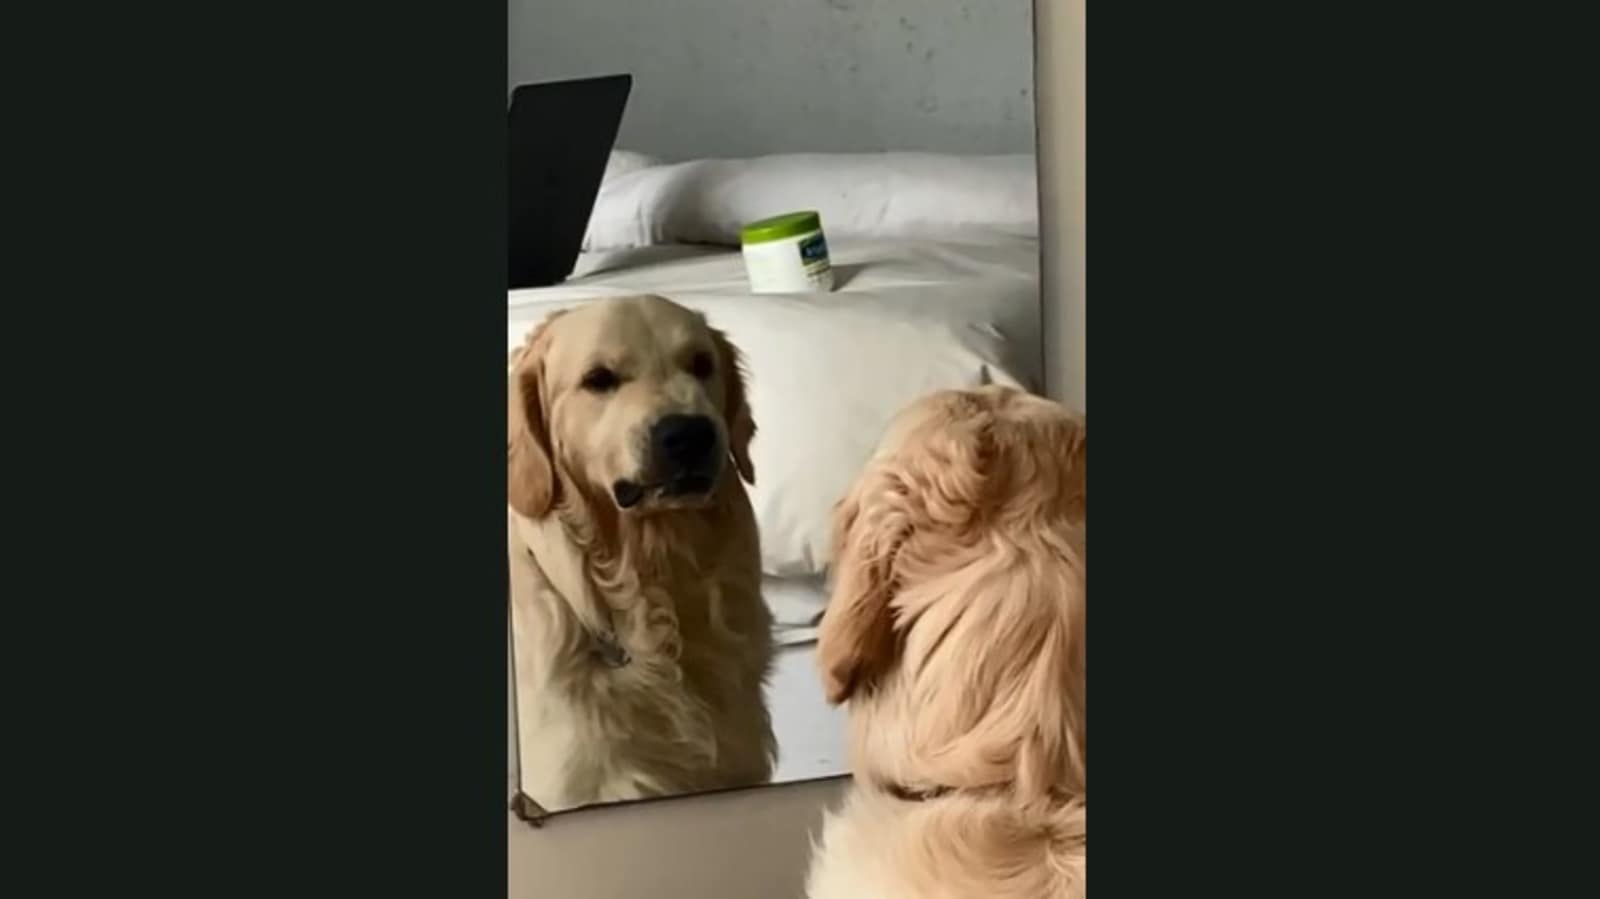 Dog practices 'mean face' expression while looking at a mirror. Watch